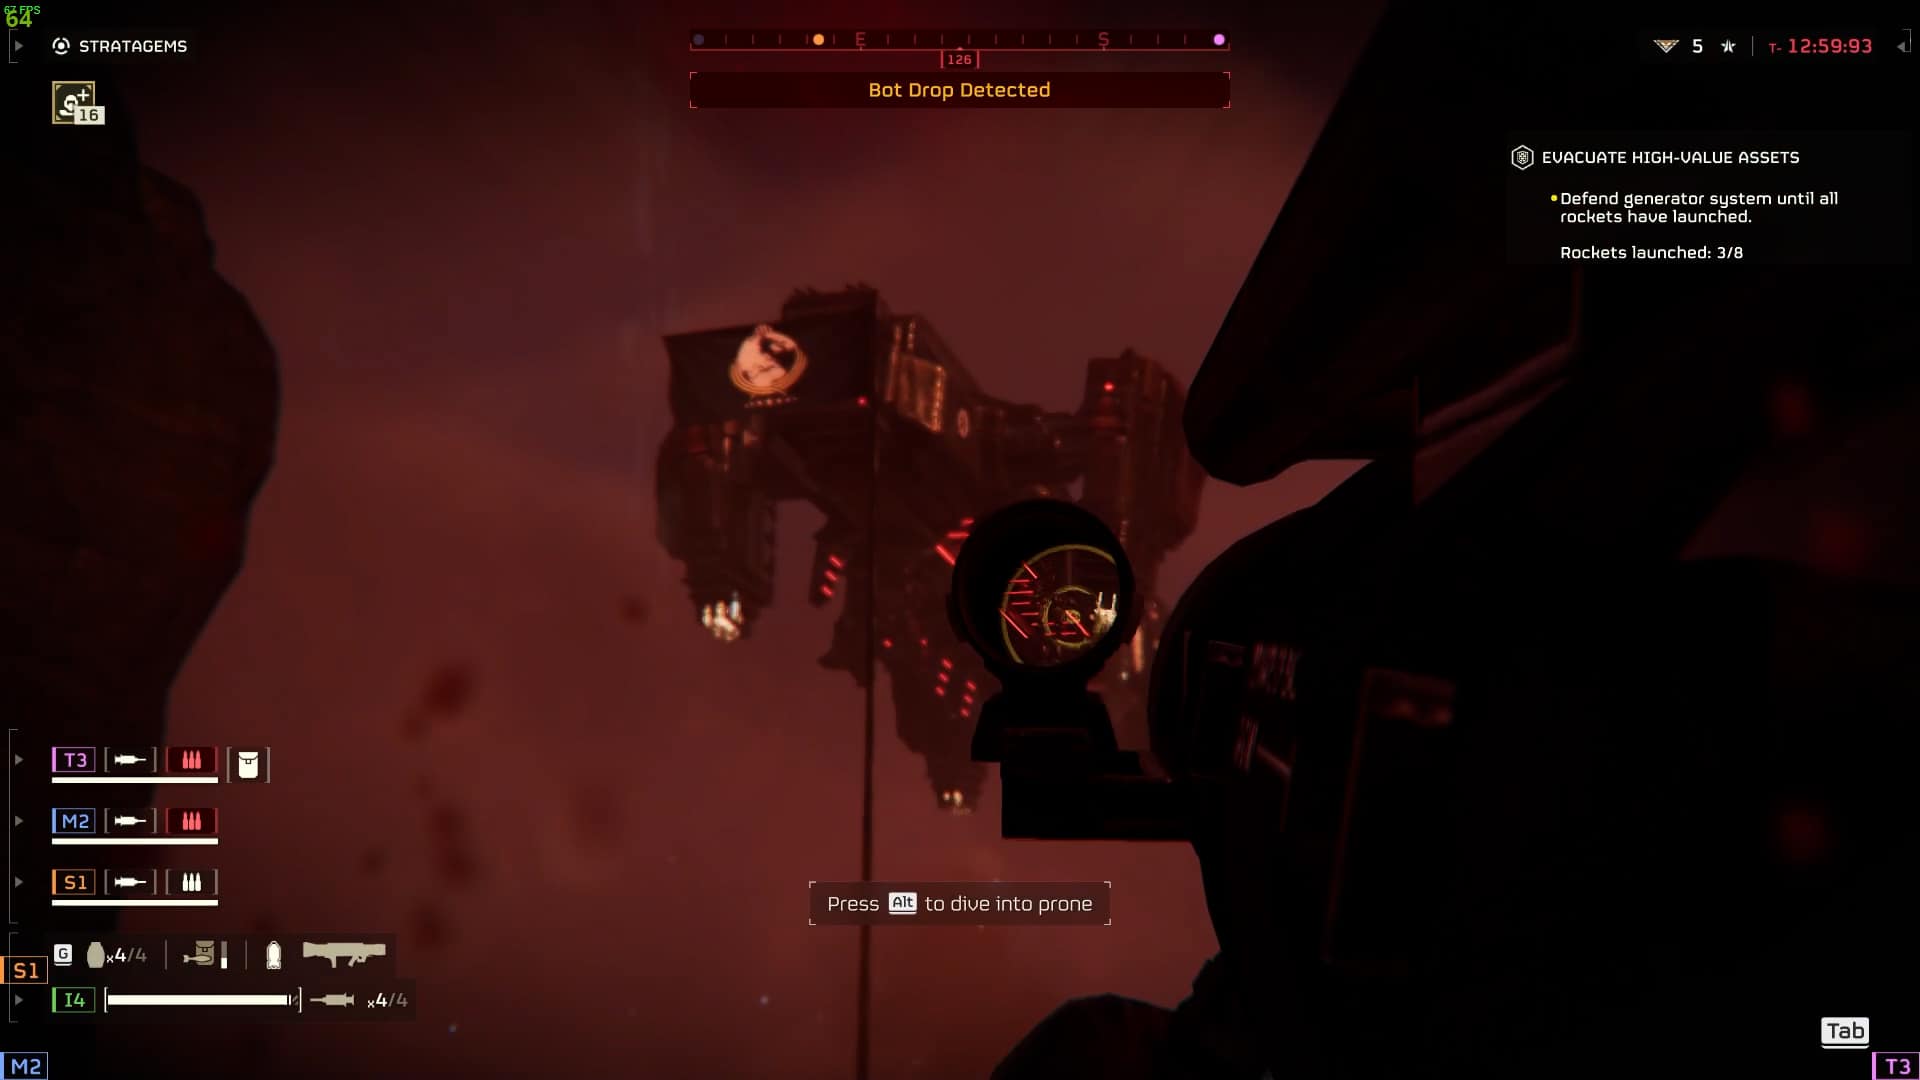 A screenshot from the video game Helldivers 2 showing a first-person view of aiming a crosshair at a robotic enemy in a dark, fiery environment with on-screen game metrics and prompts.